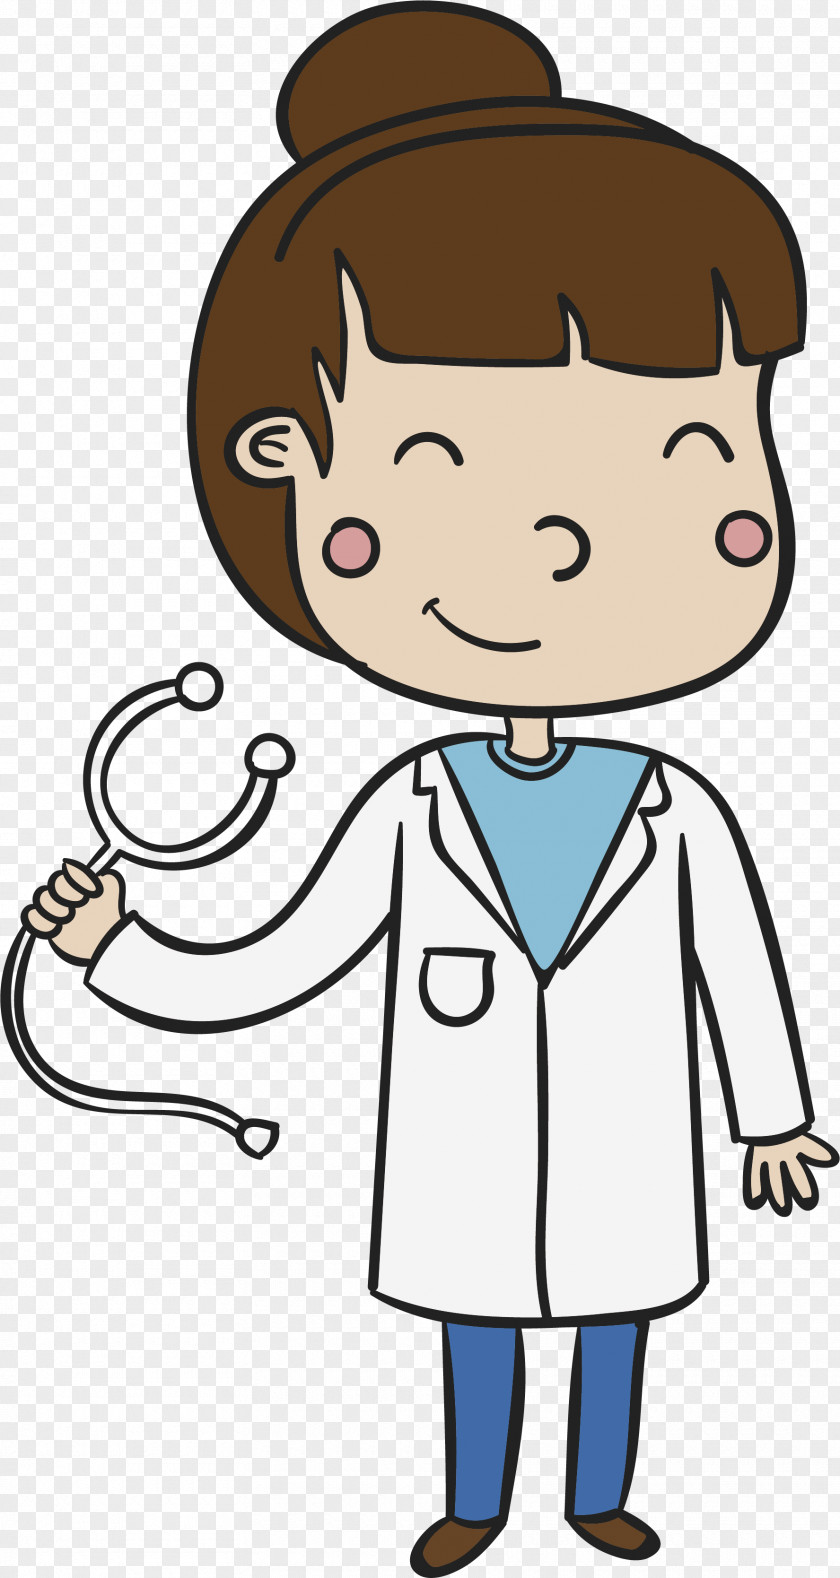 Cartoon Smile Female Doctor Physician Clip Art PNG